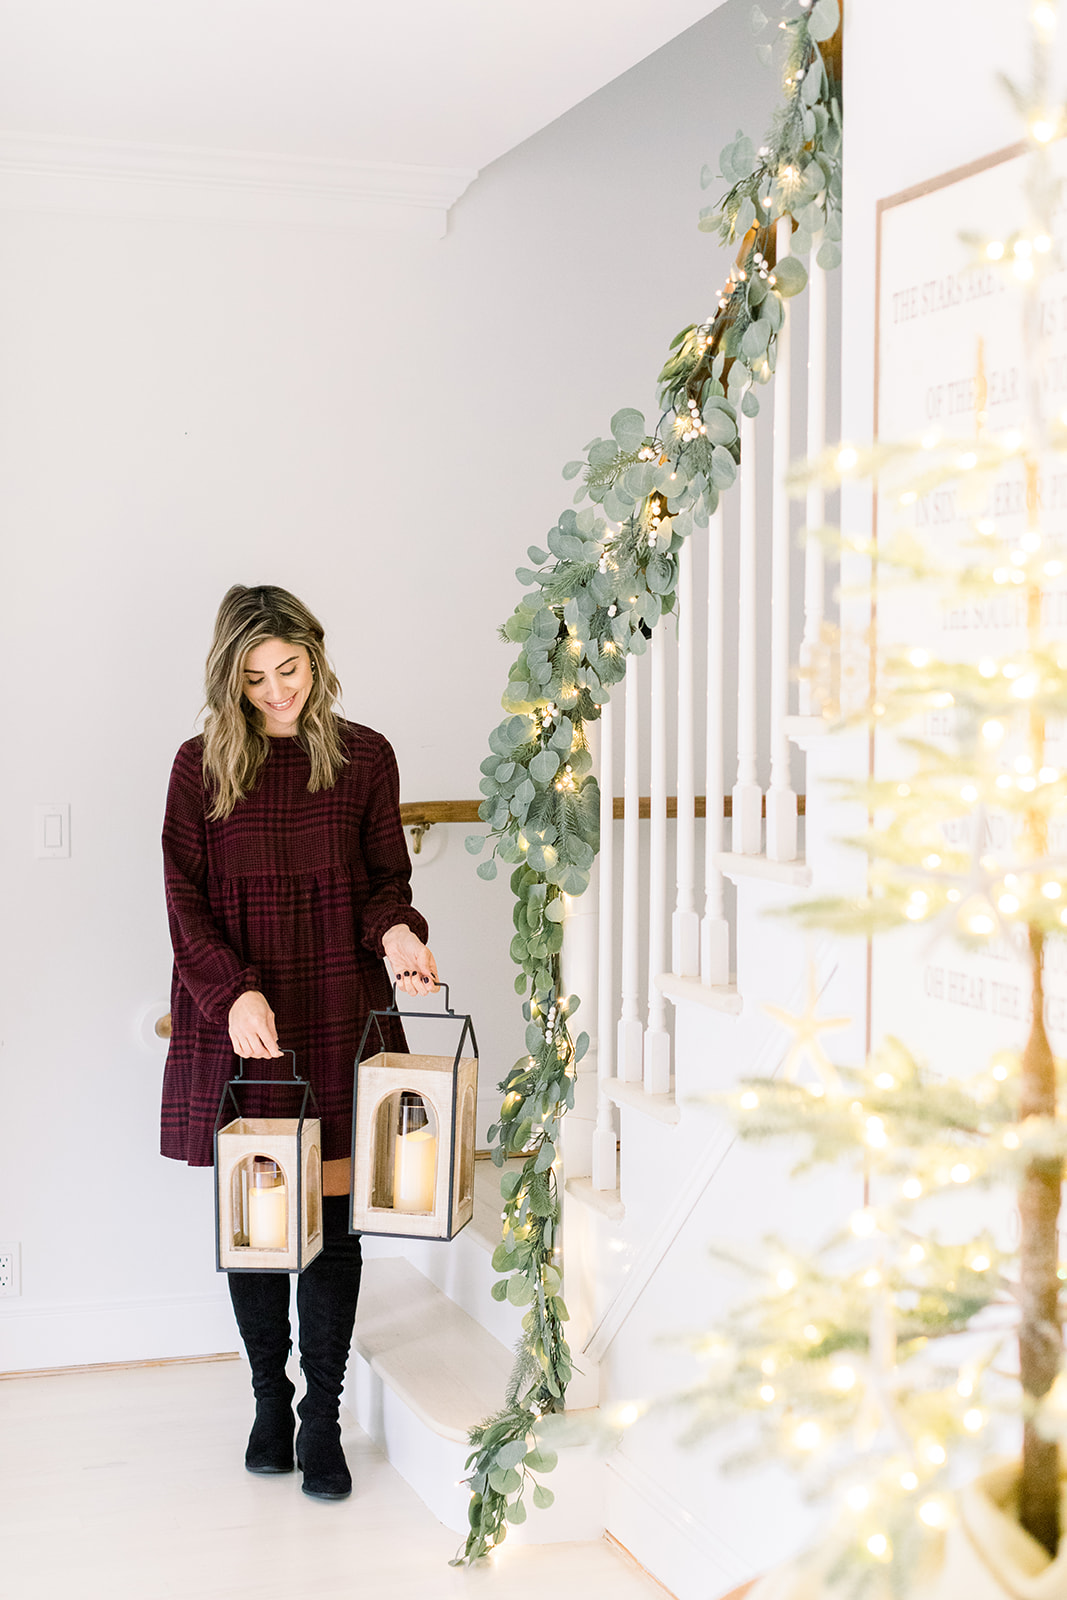 Connecticut life and style blogger Lauren McBride shares her newest QVC launch, a holiday-inspired giftable collection.